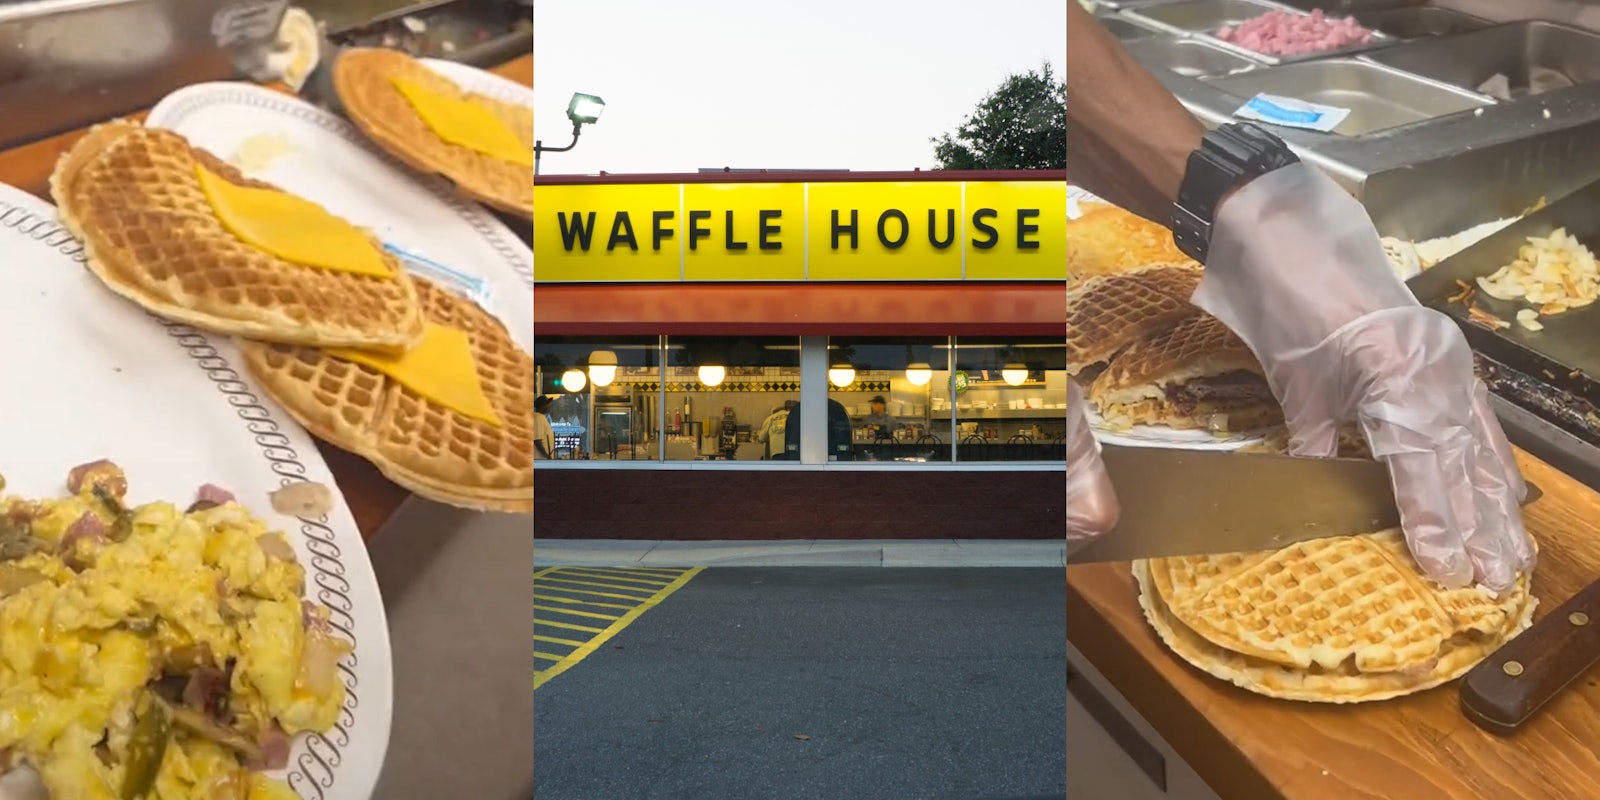 Waffle House waffles with cheese and eggs on plates on counter (l) Waffle House building with sign and parking lot (c) Waffle house employee cutting into waffle sandwich (r)